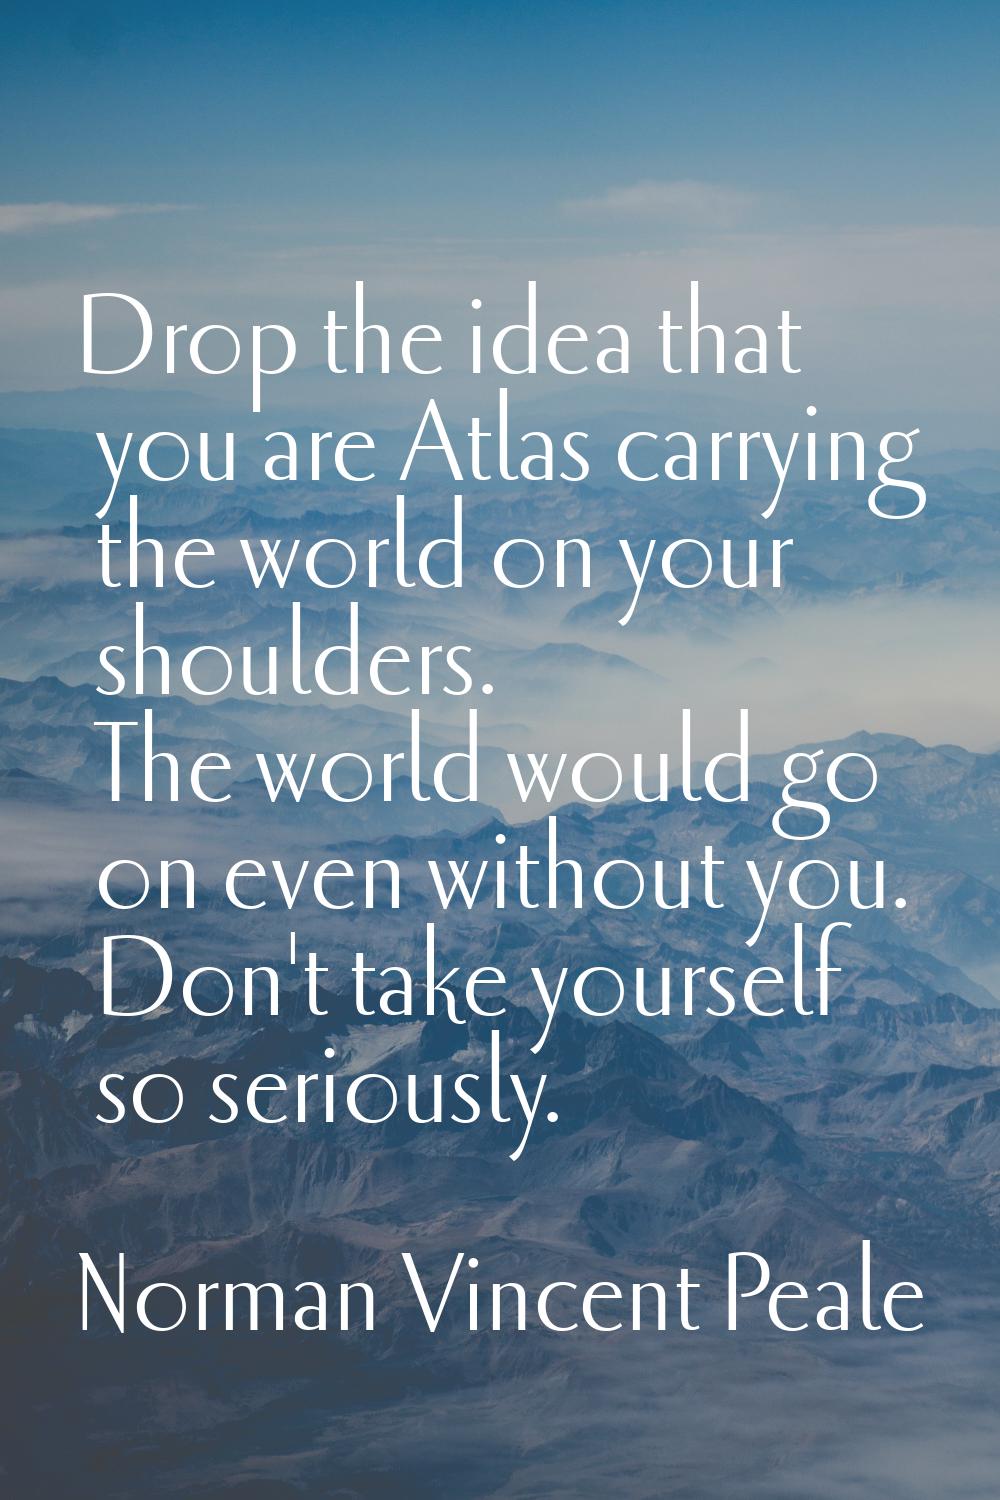 Drop the idea that you are Atlas carrying the world on your shoulders. The world would go on even w